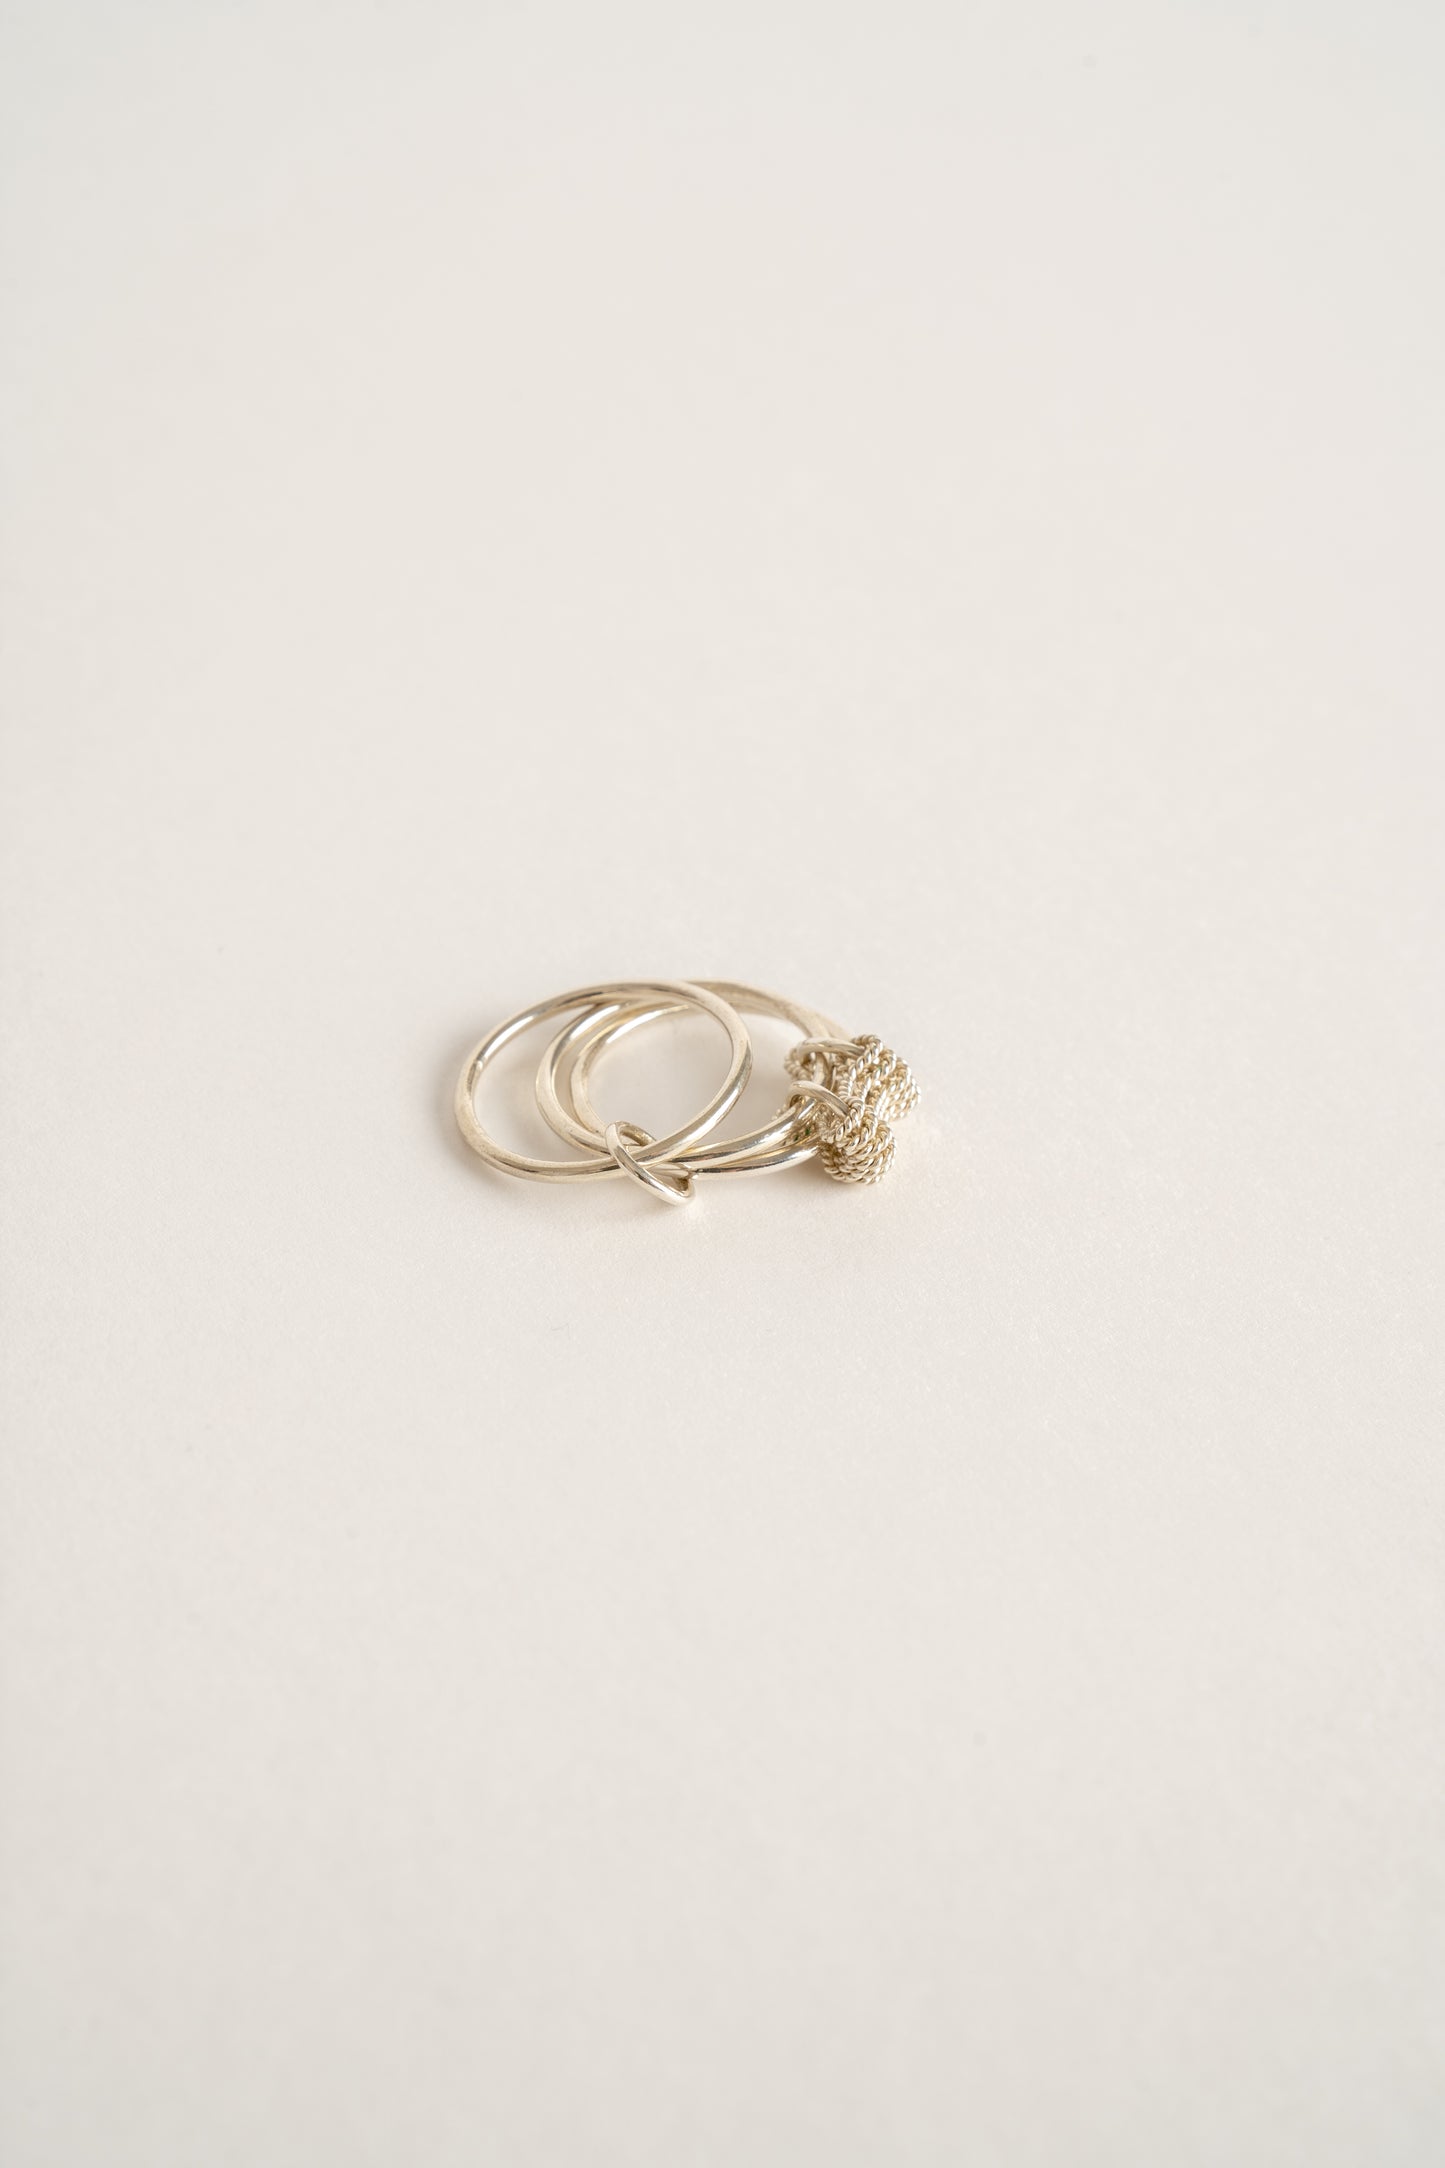 Ruth Leslie Recycled Sterling Silver Fidget Ring - 3 Bands